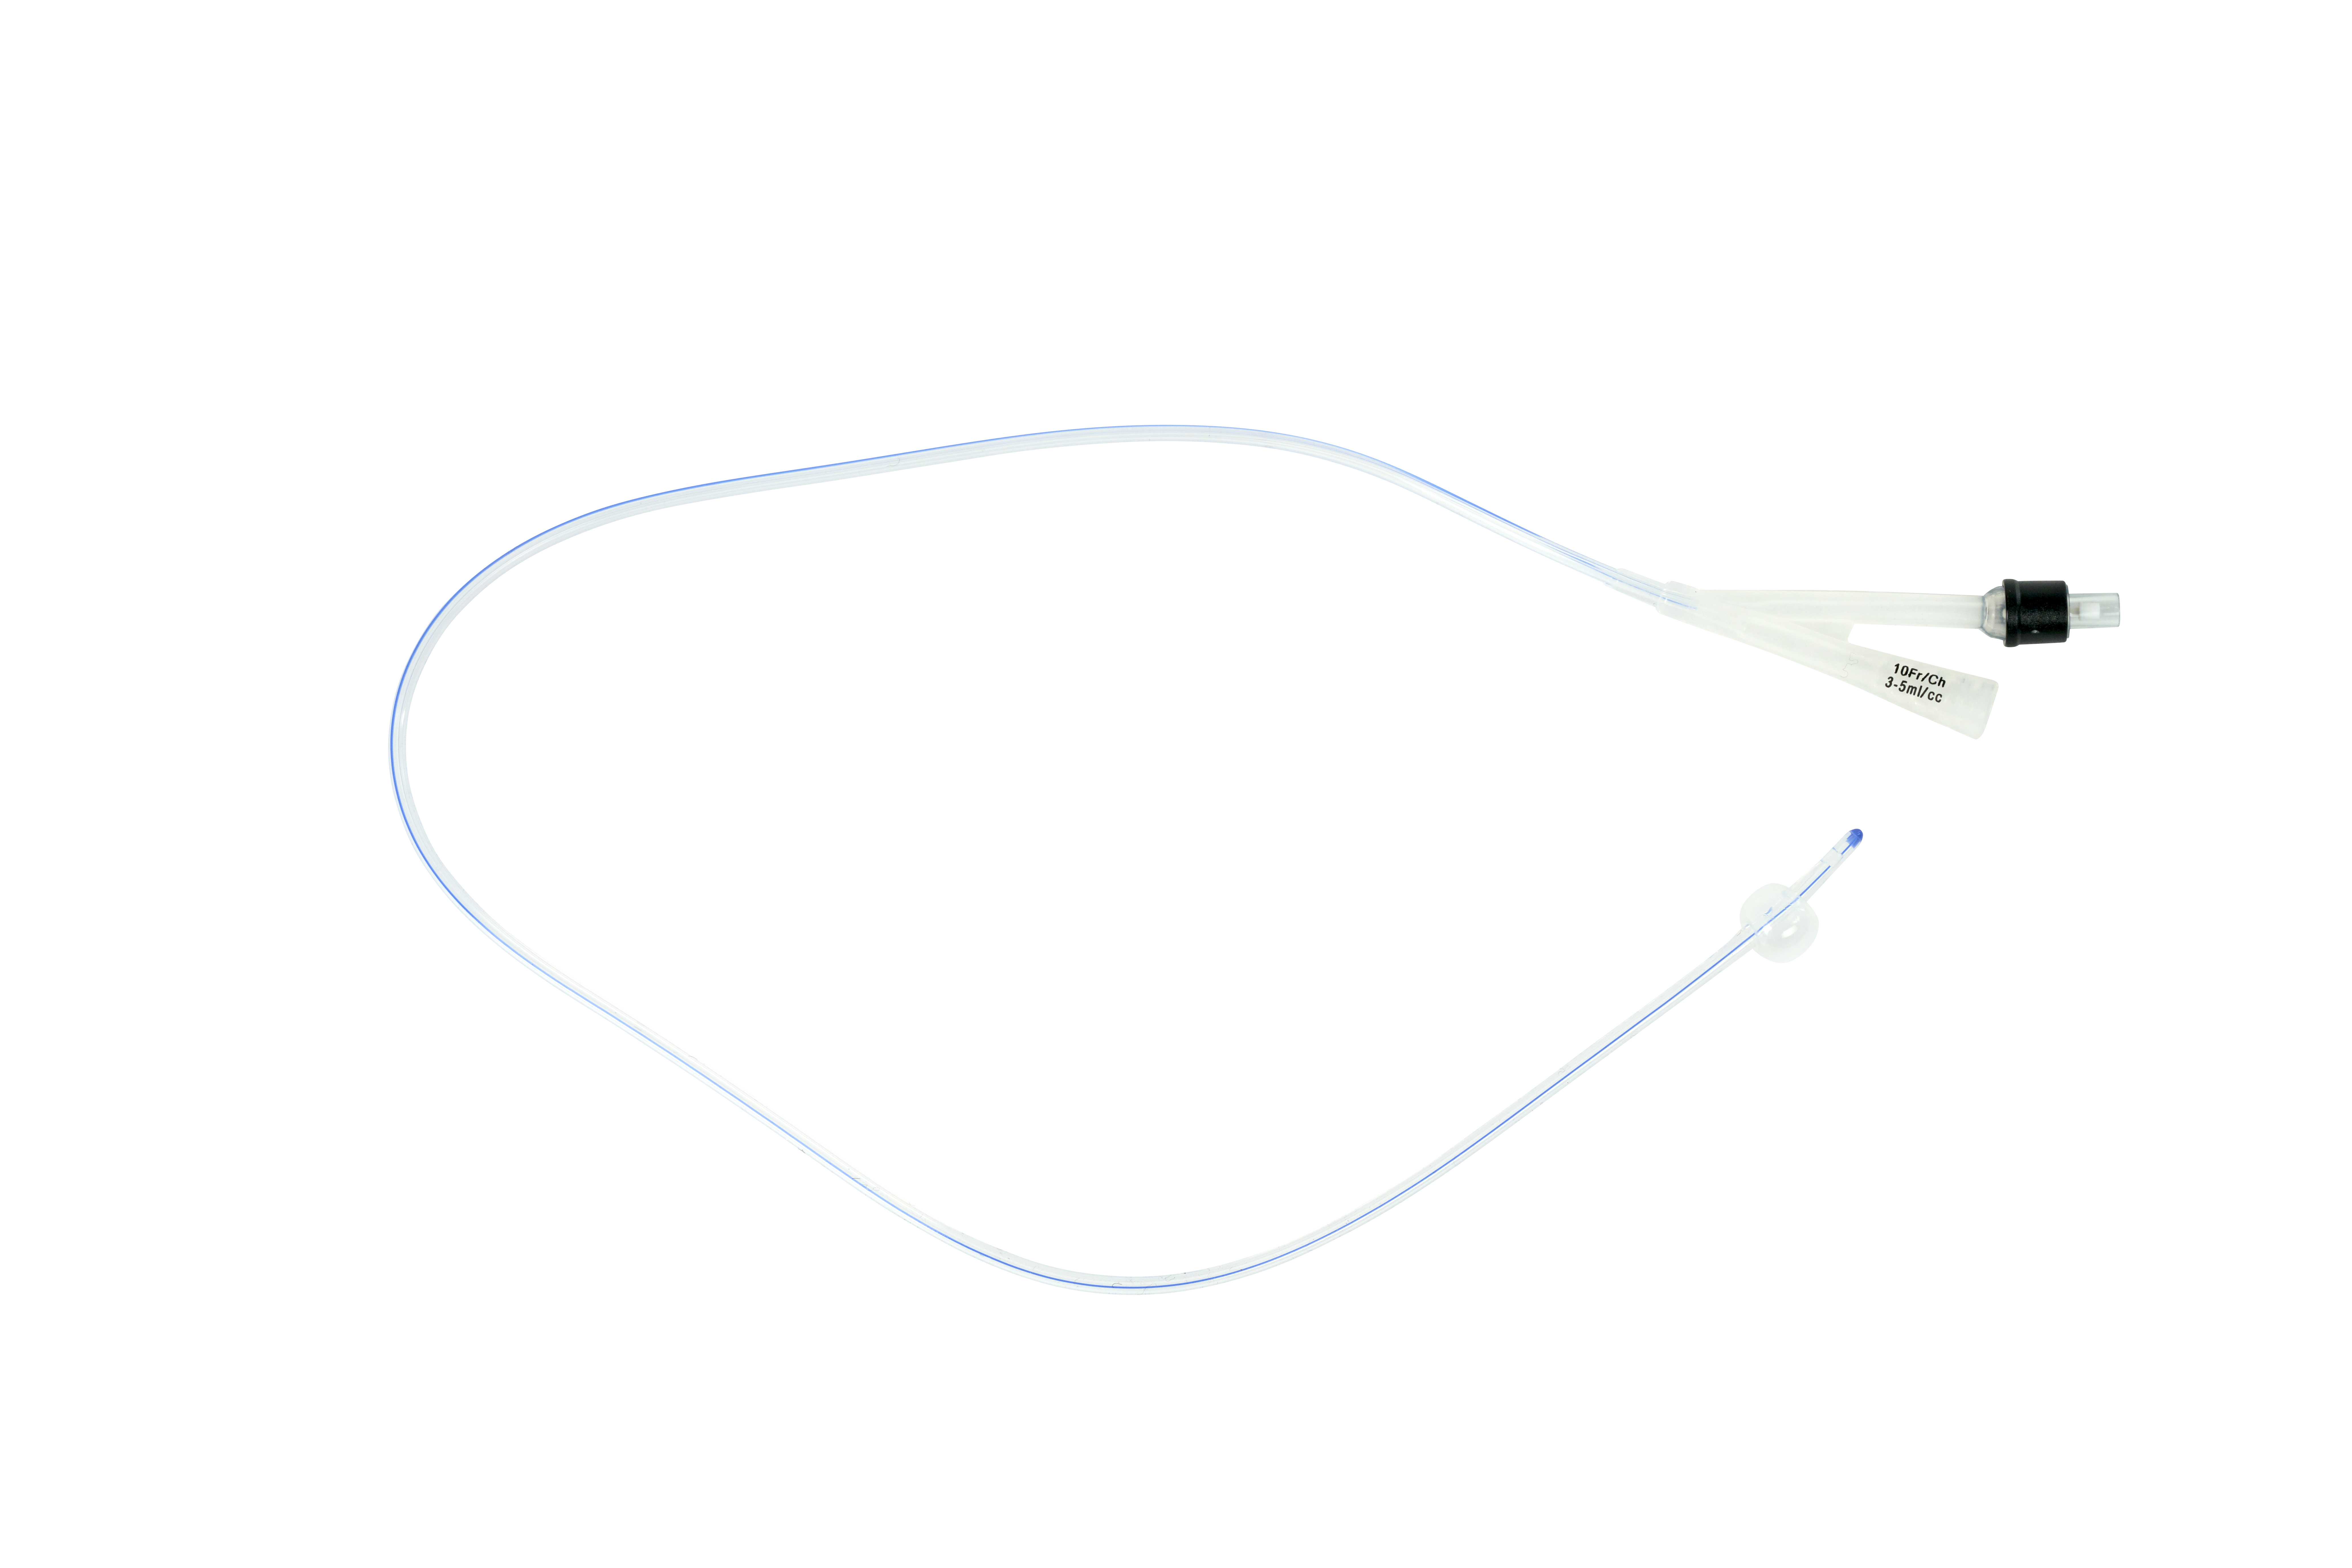 BUSTER Foley silicone catheter 10 Fr (3,3 mm), 70 cm, 5/pk